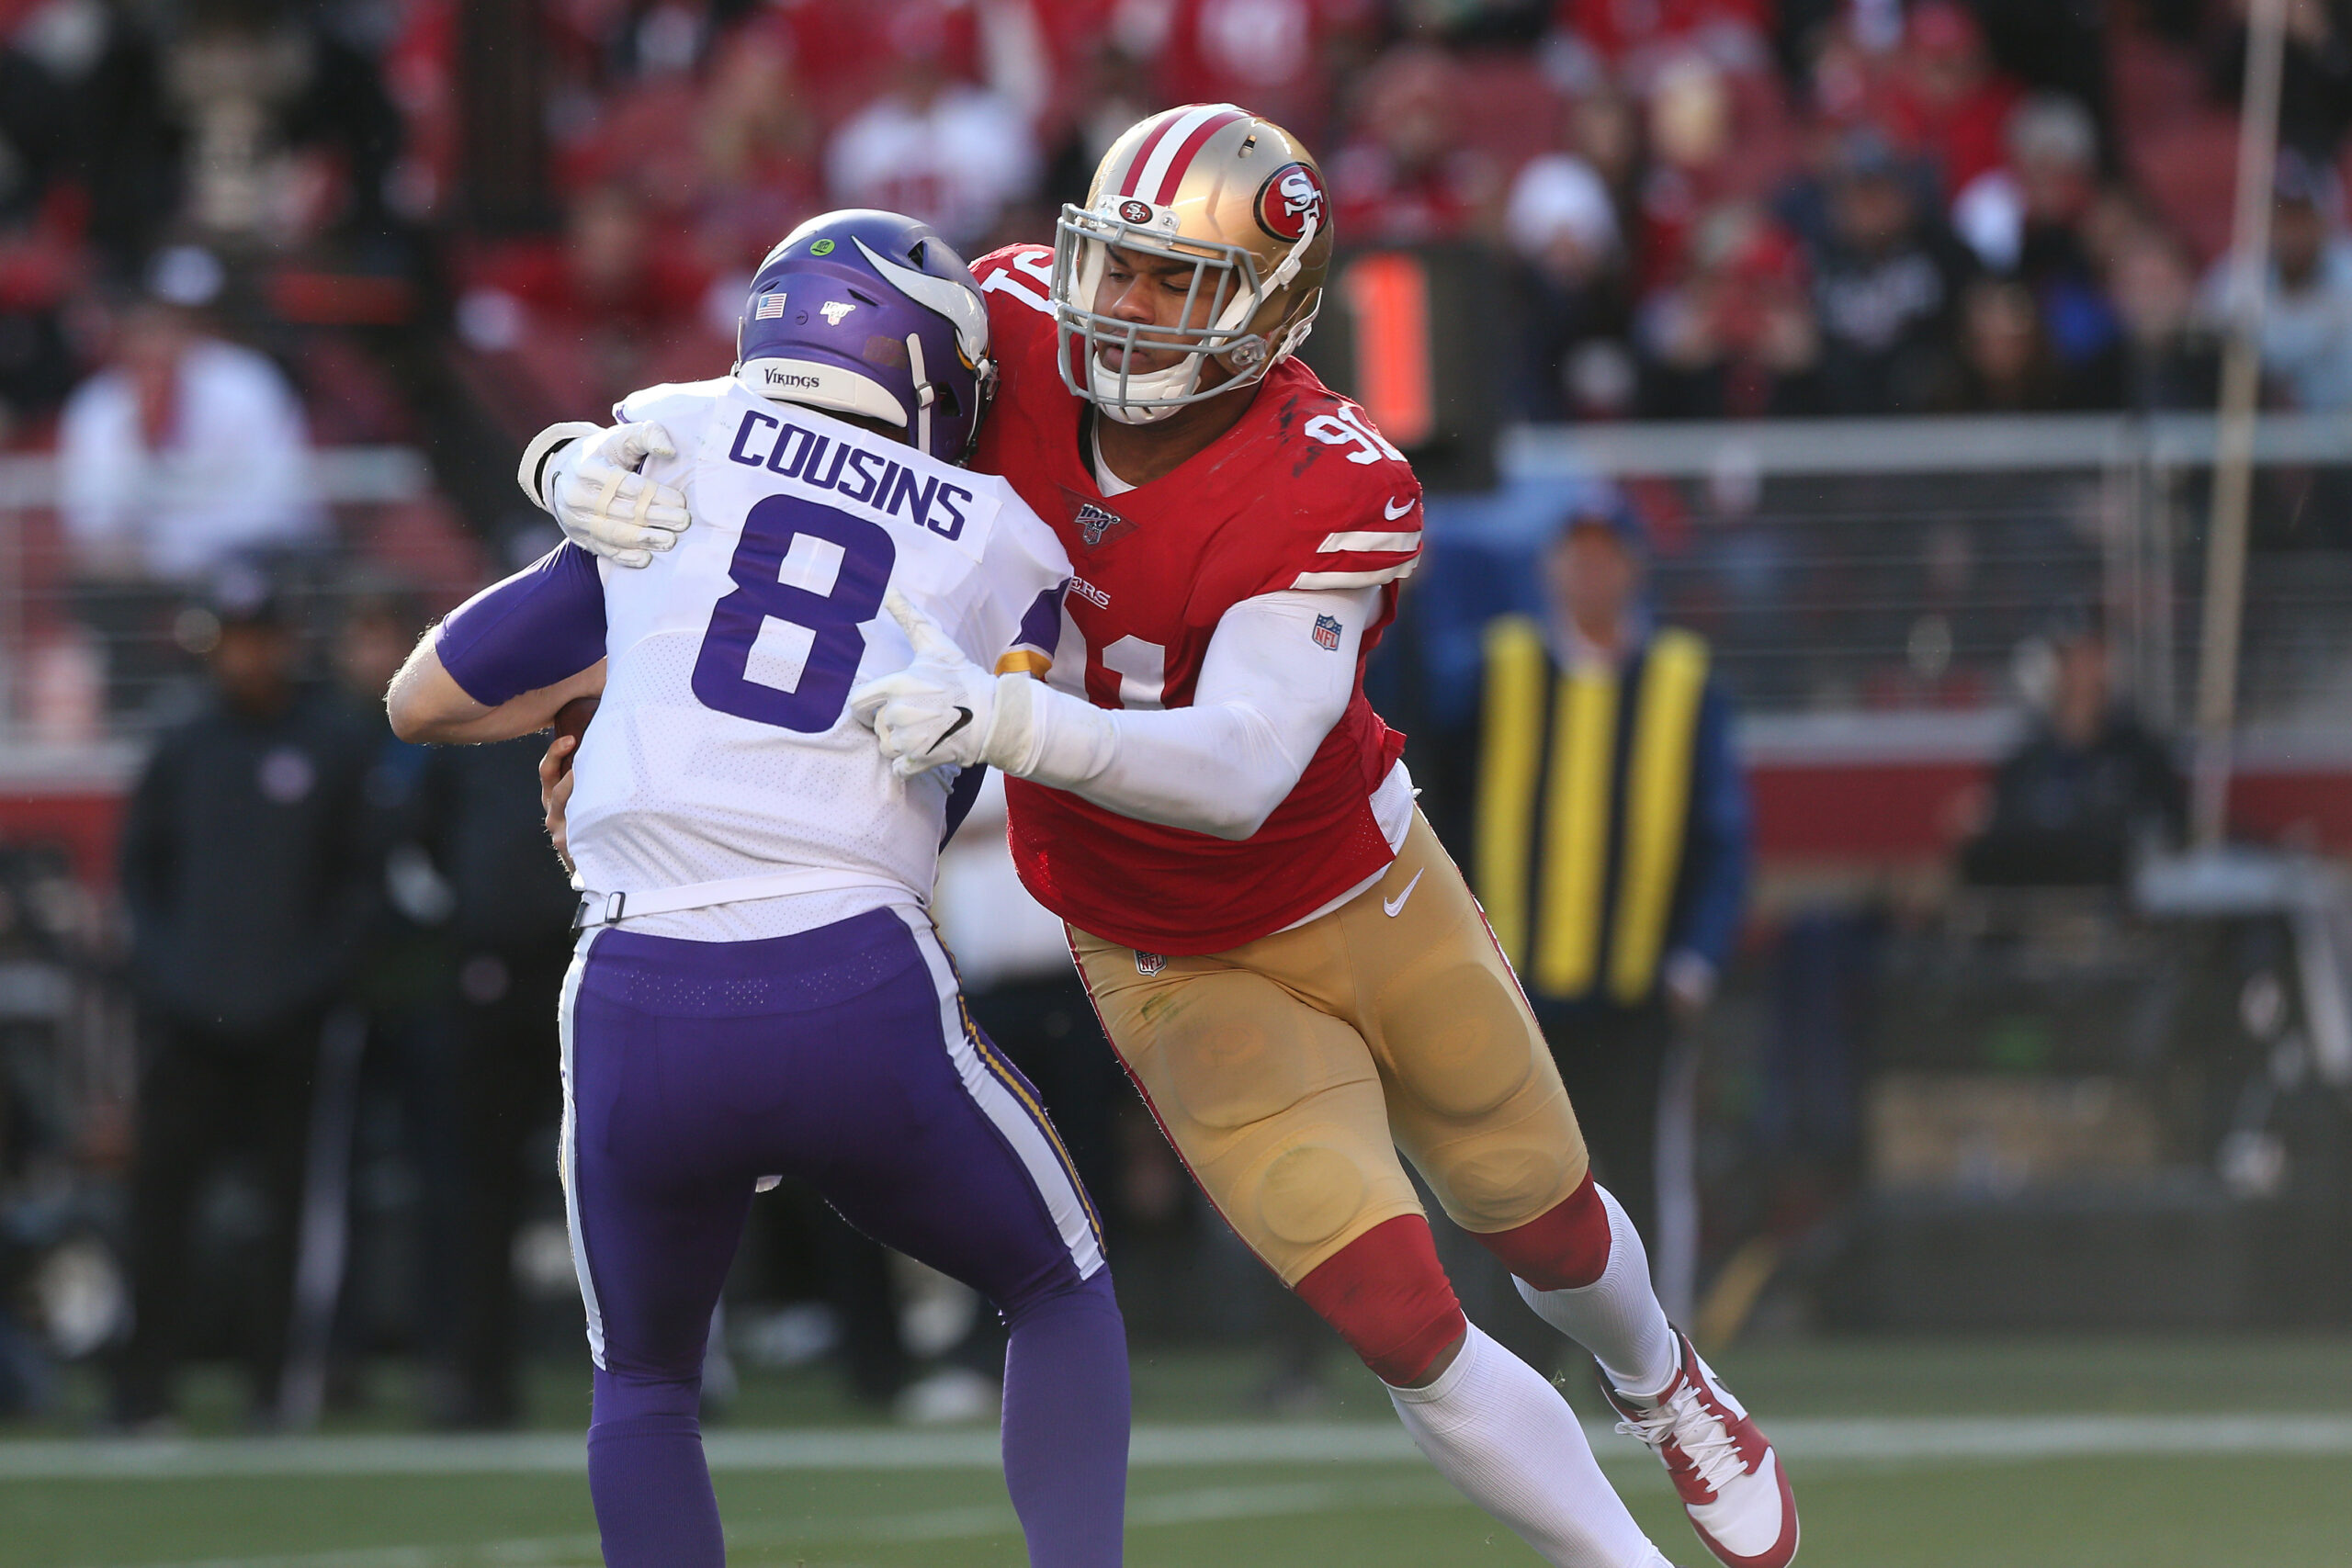 Let’s relax on 49ers QB trade rumors and speculation